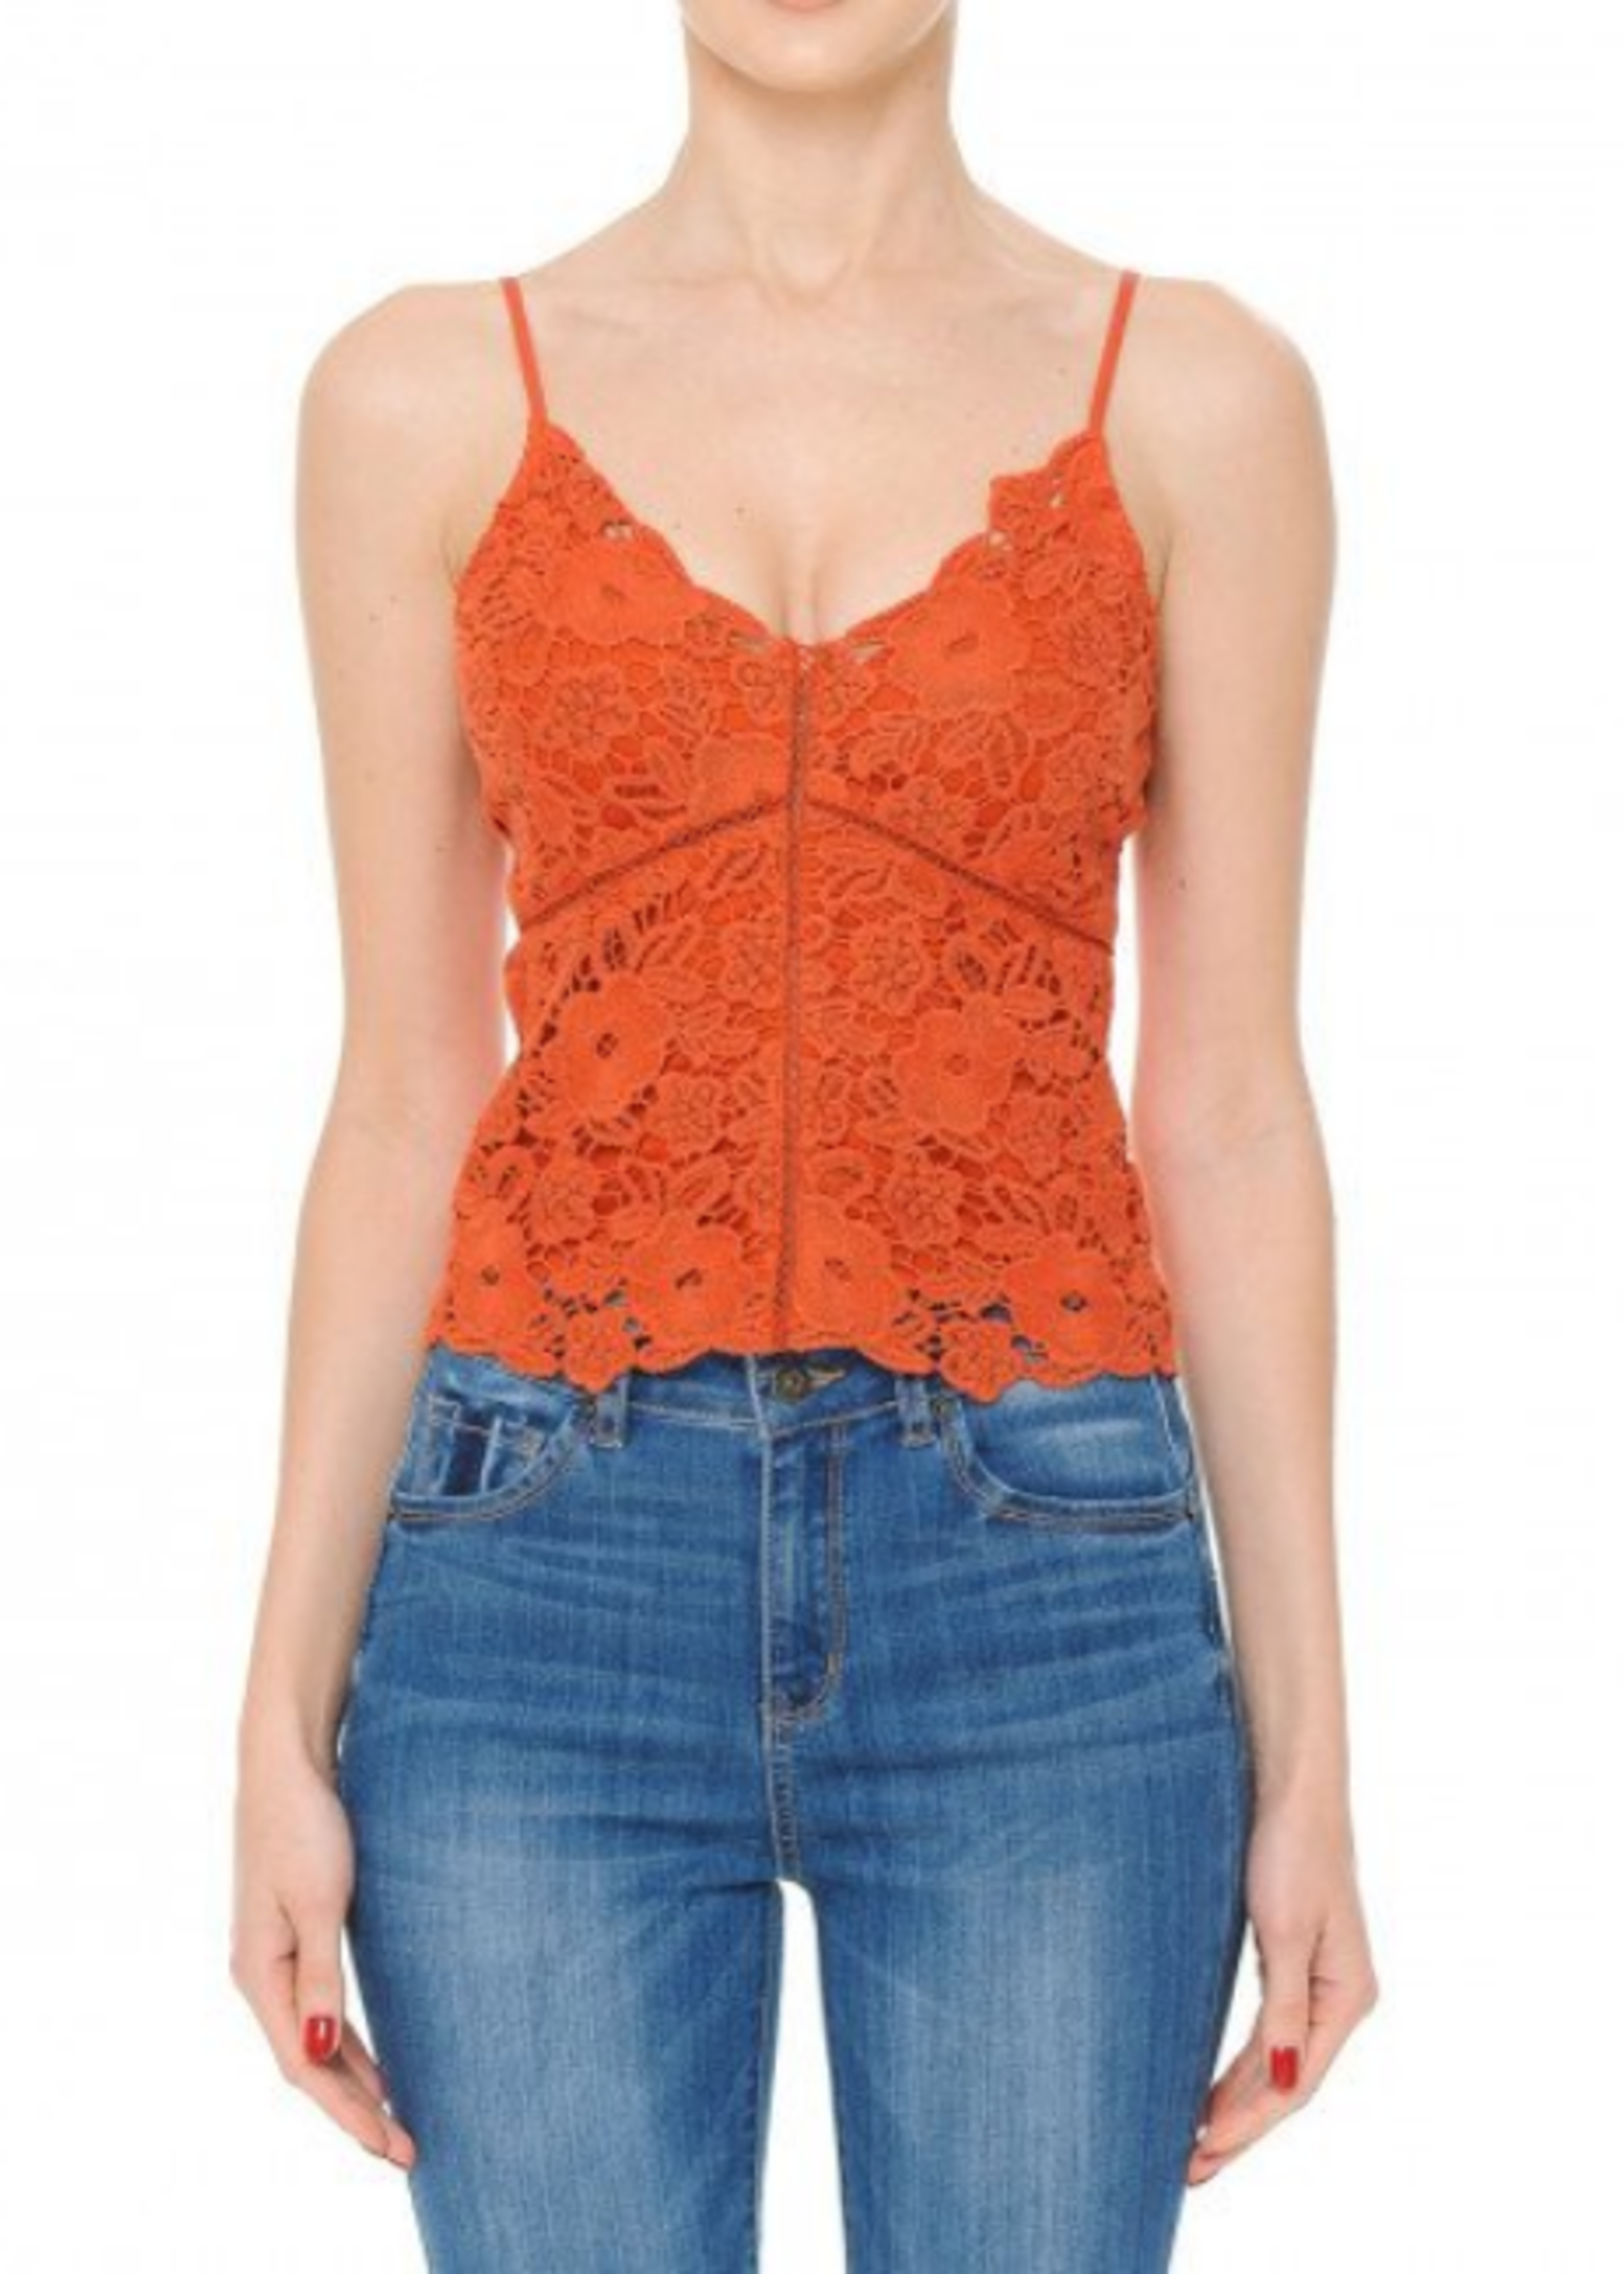 Ambiance Apparel Womans Lace Tank Top - 65942